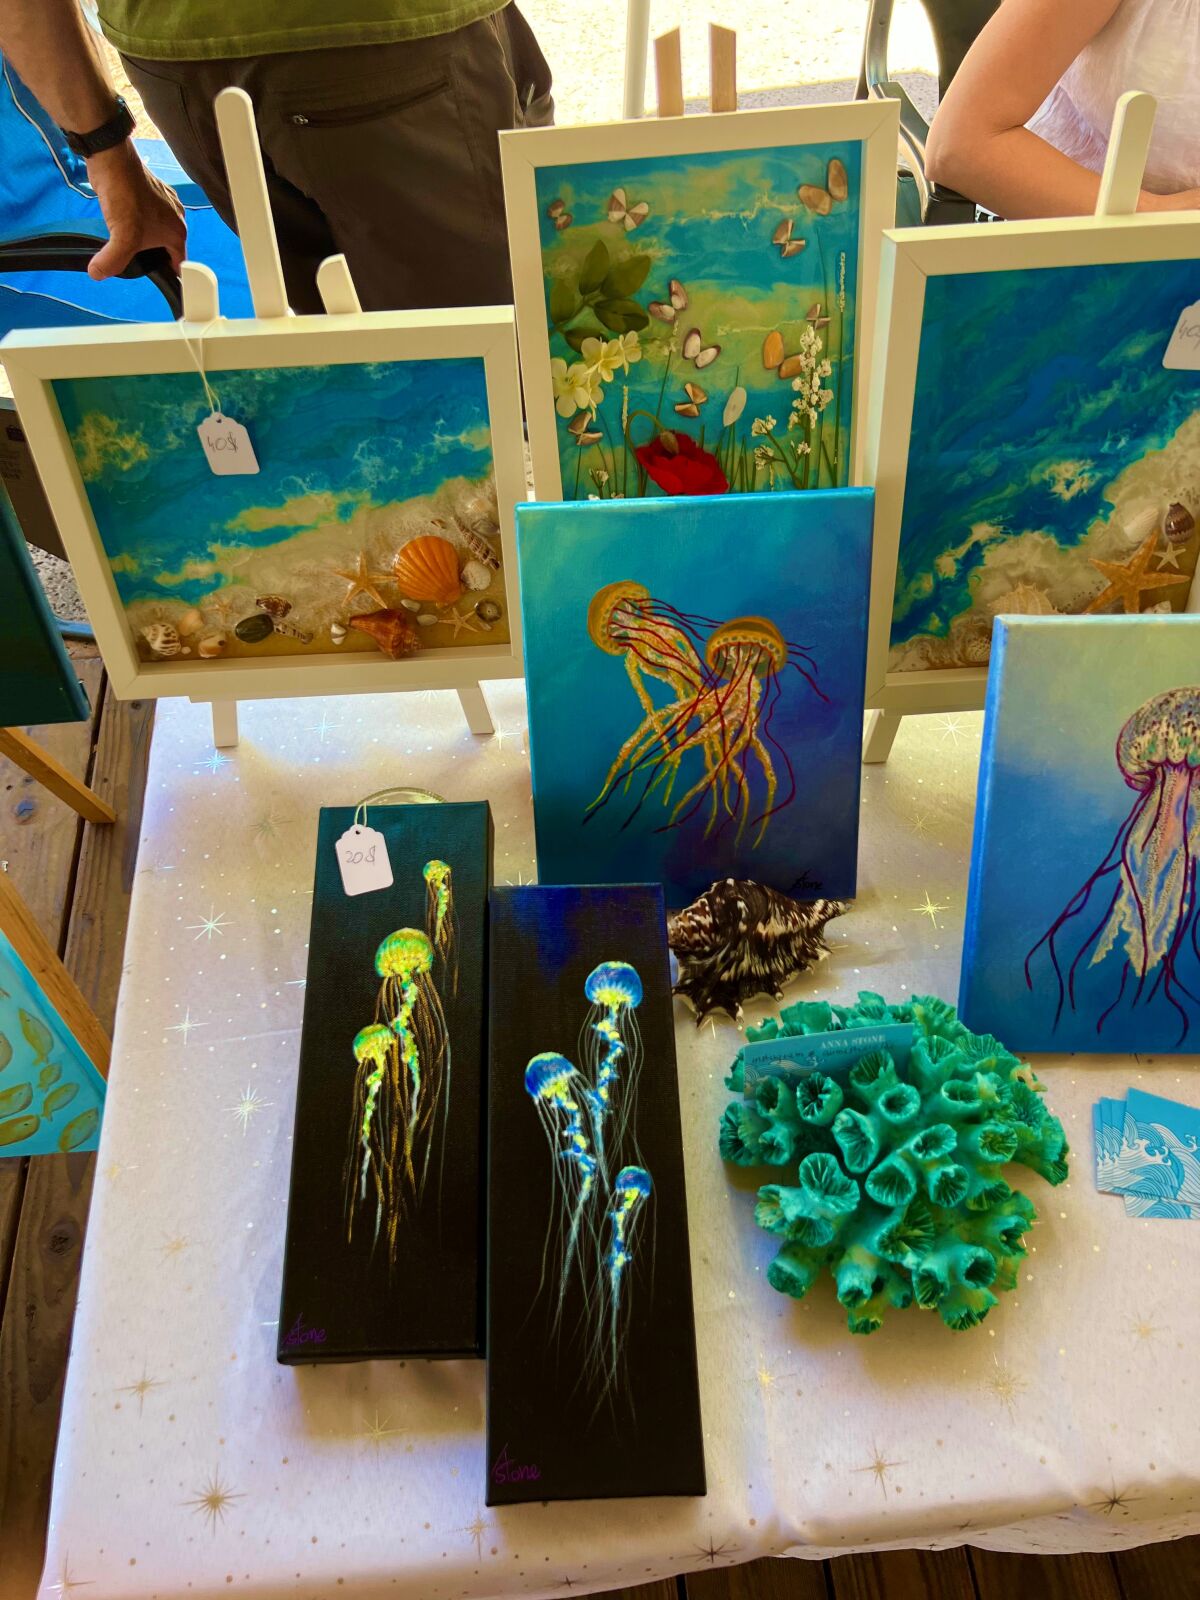 Paintings by Anna Stone at Saturday's Artisan Market.